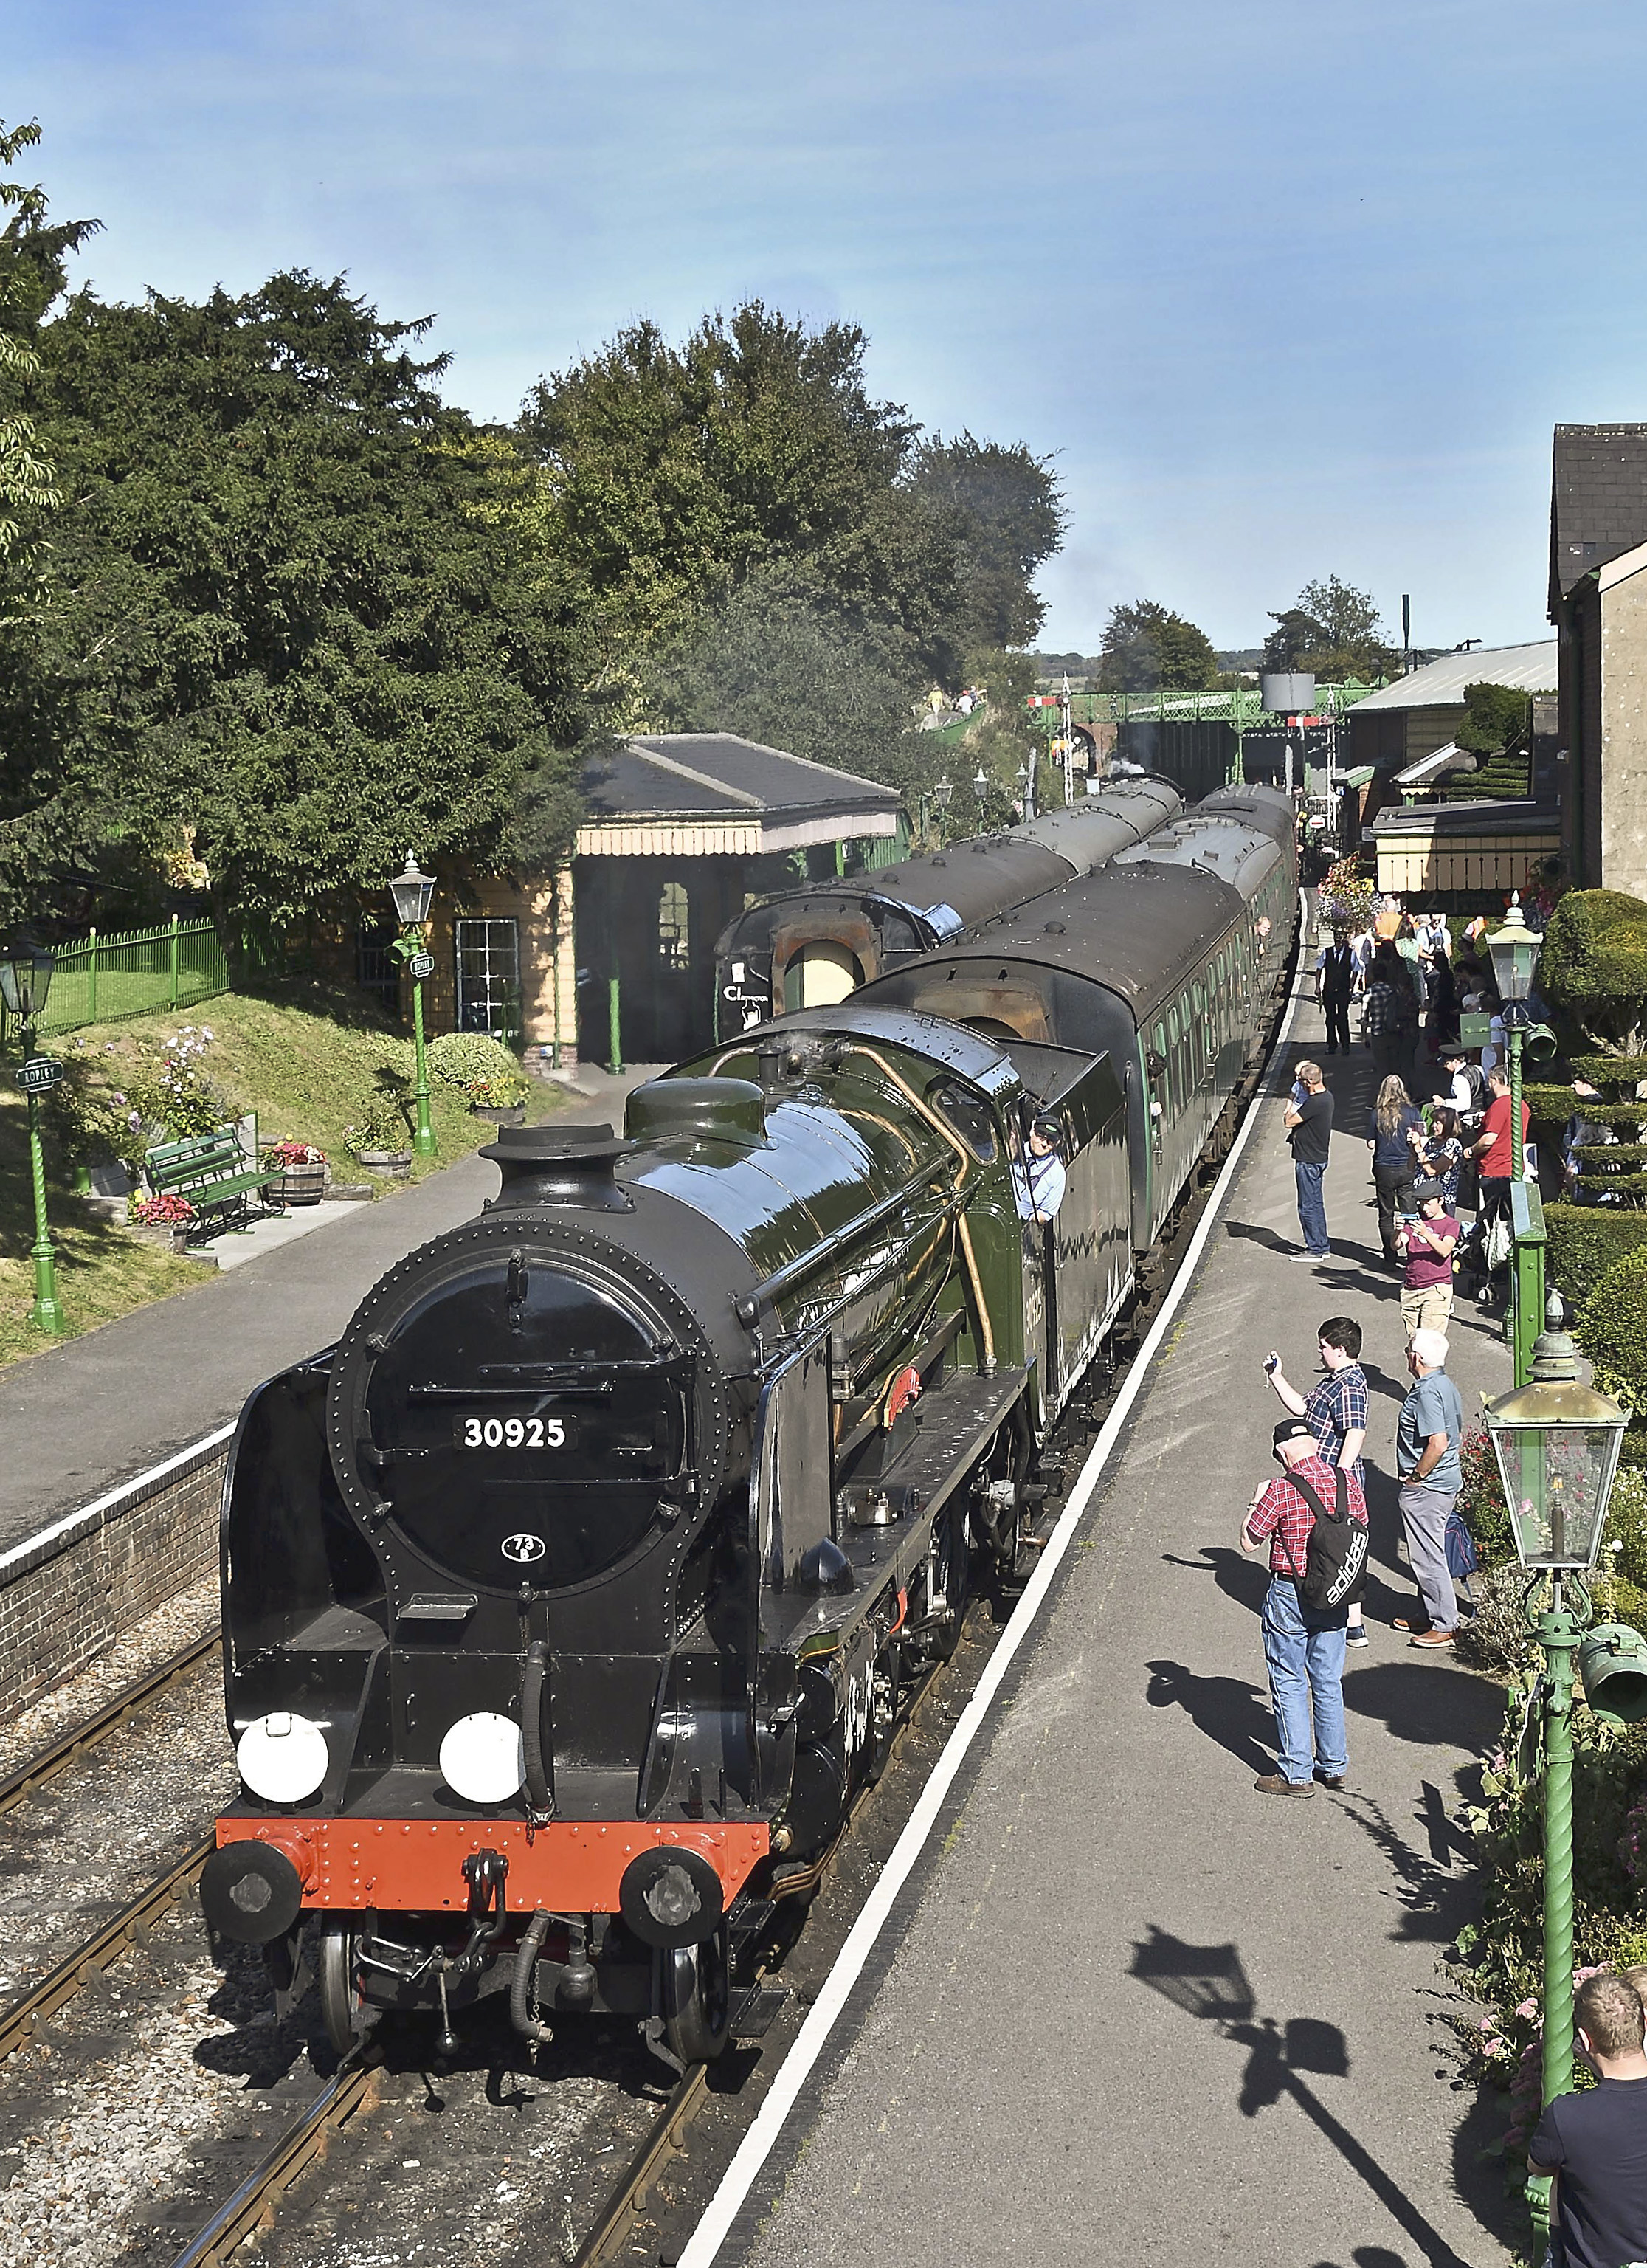 Ex-SR Schools class 30925 Cheltenham rolls into Ropley station with the 15.00 Medstead & Four Marks-Alresford train on 14th September 2019.  This was its first day in passenger service in BR lined green livery since 1962!  David Cox
This photo was on the back cover of November 2019 RO.